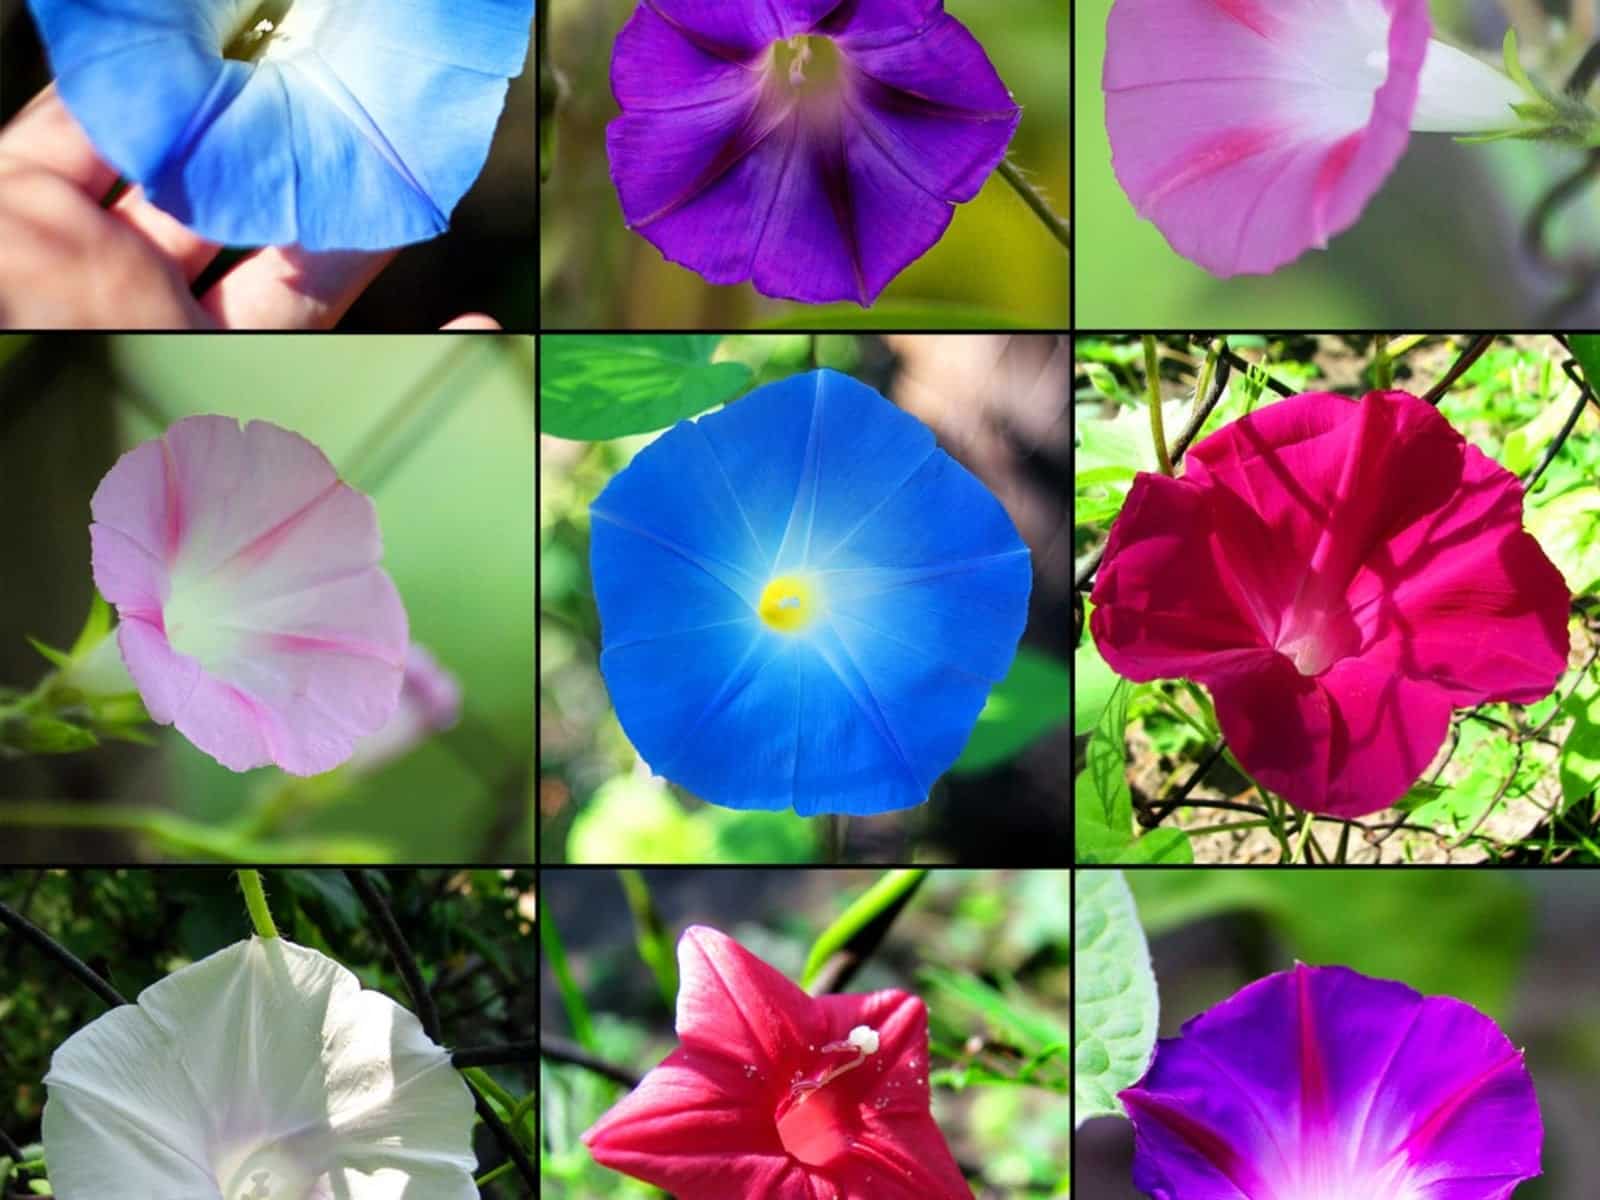 Different varieties of morning glory flowers